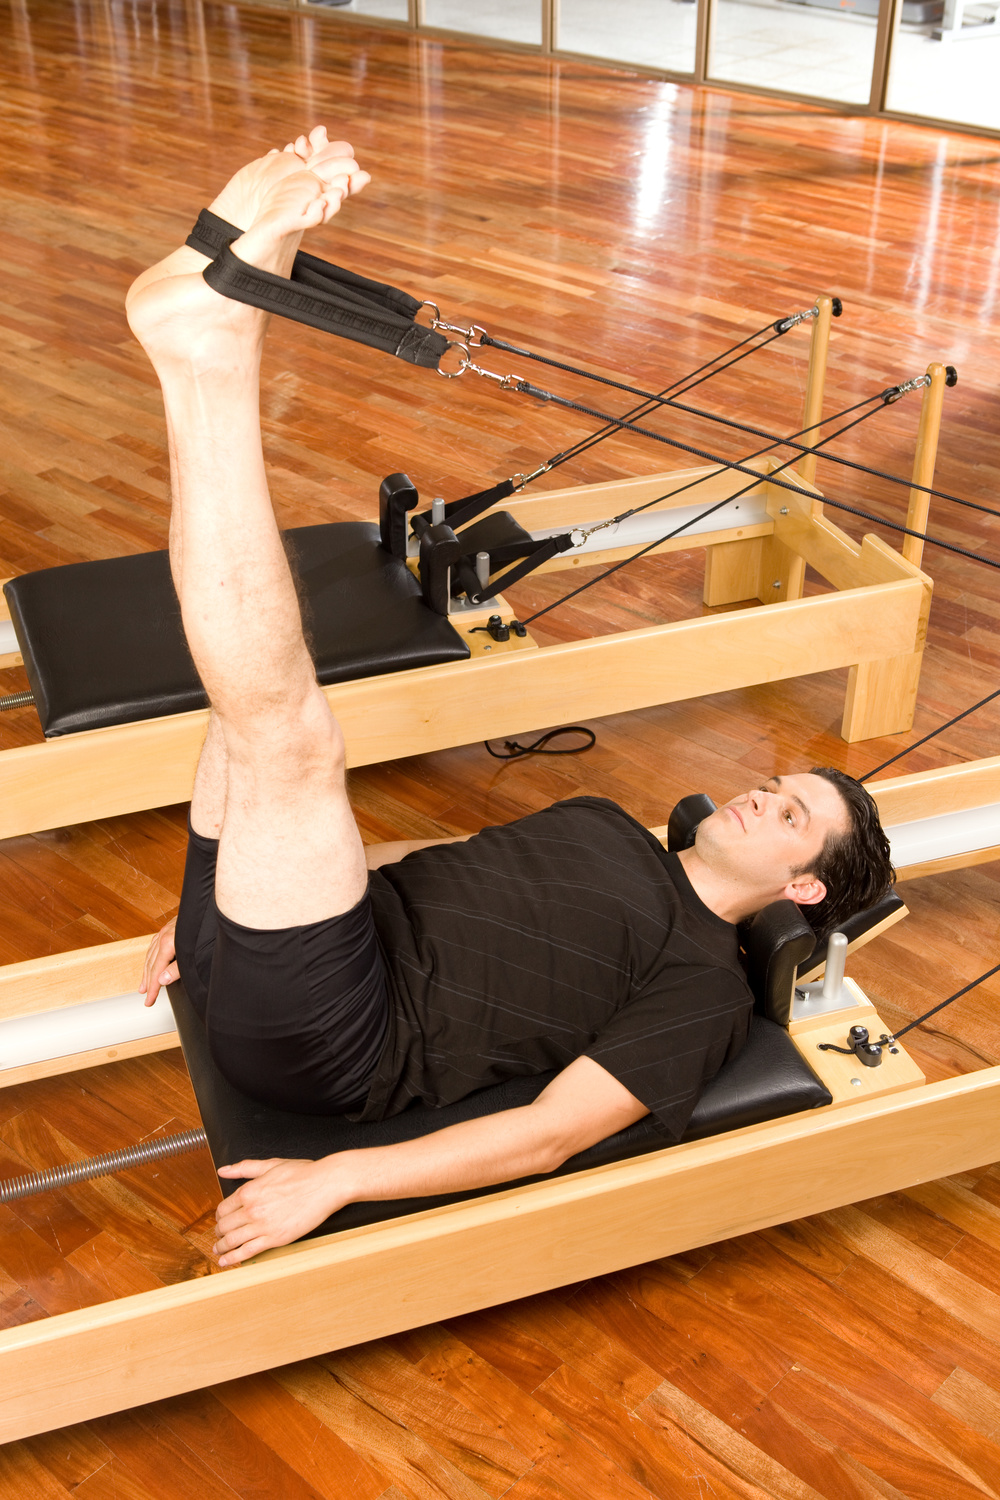 Attention men! Pilates is designed for you too! 